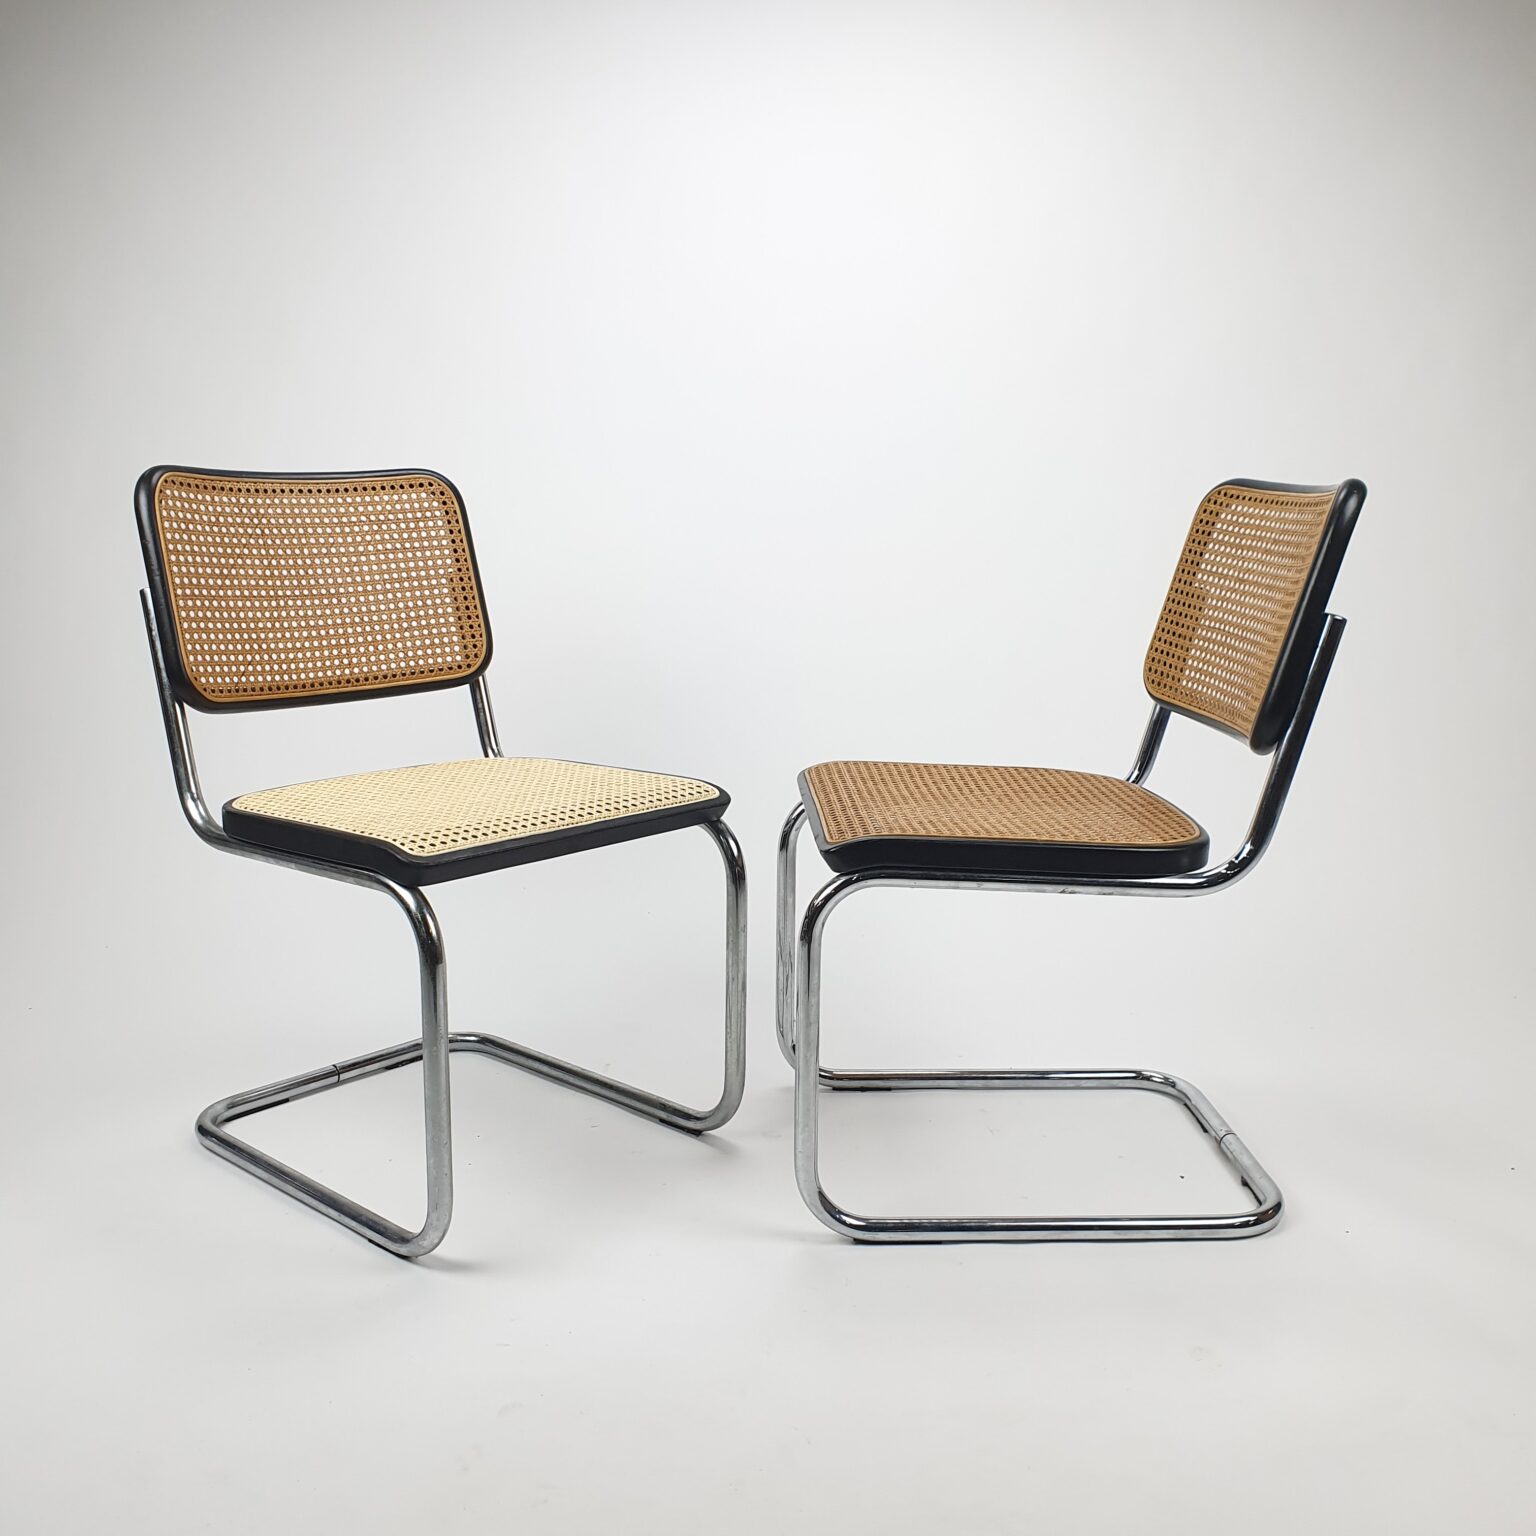 Set of 2 original Thonet S32 Dining chairs by Marcel Breuer, 1970 (Sold ...